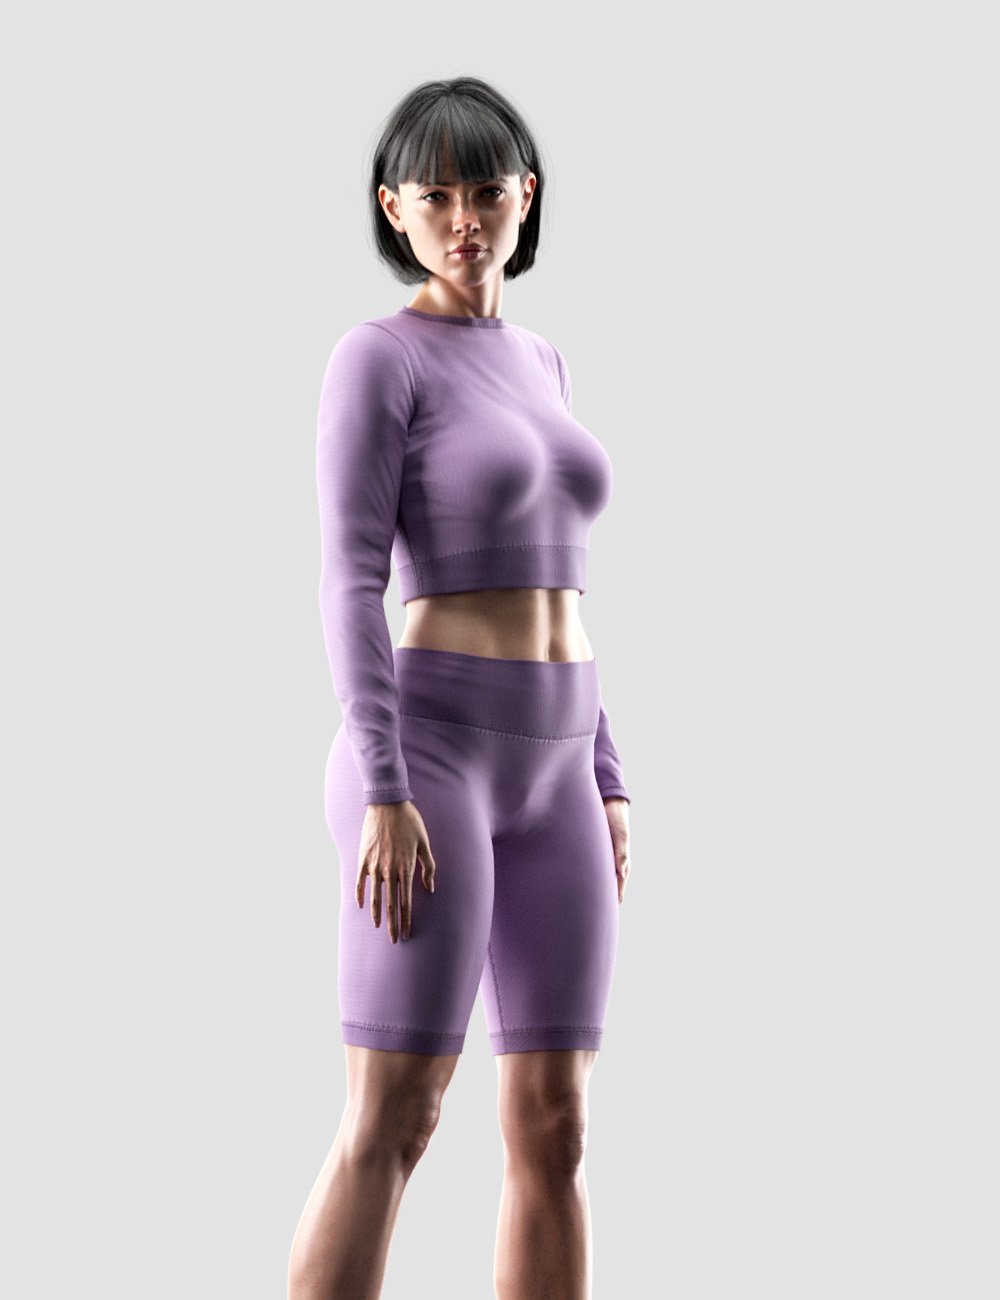 Peach Sports Outfit for Genesis 9 by: Romeo, 3D Models by Daz 3D